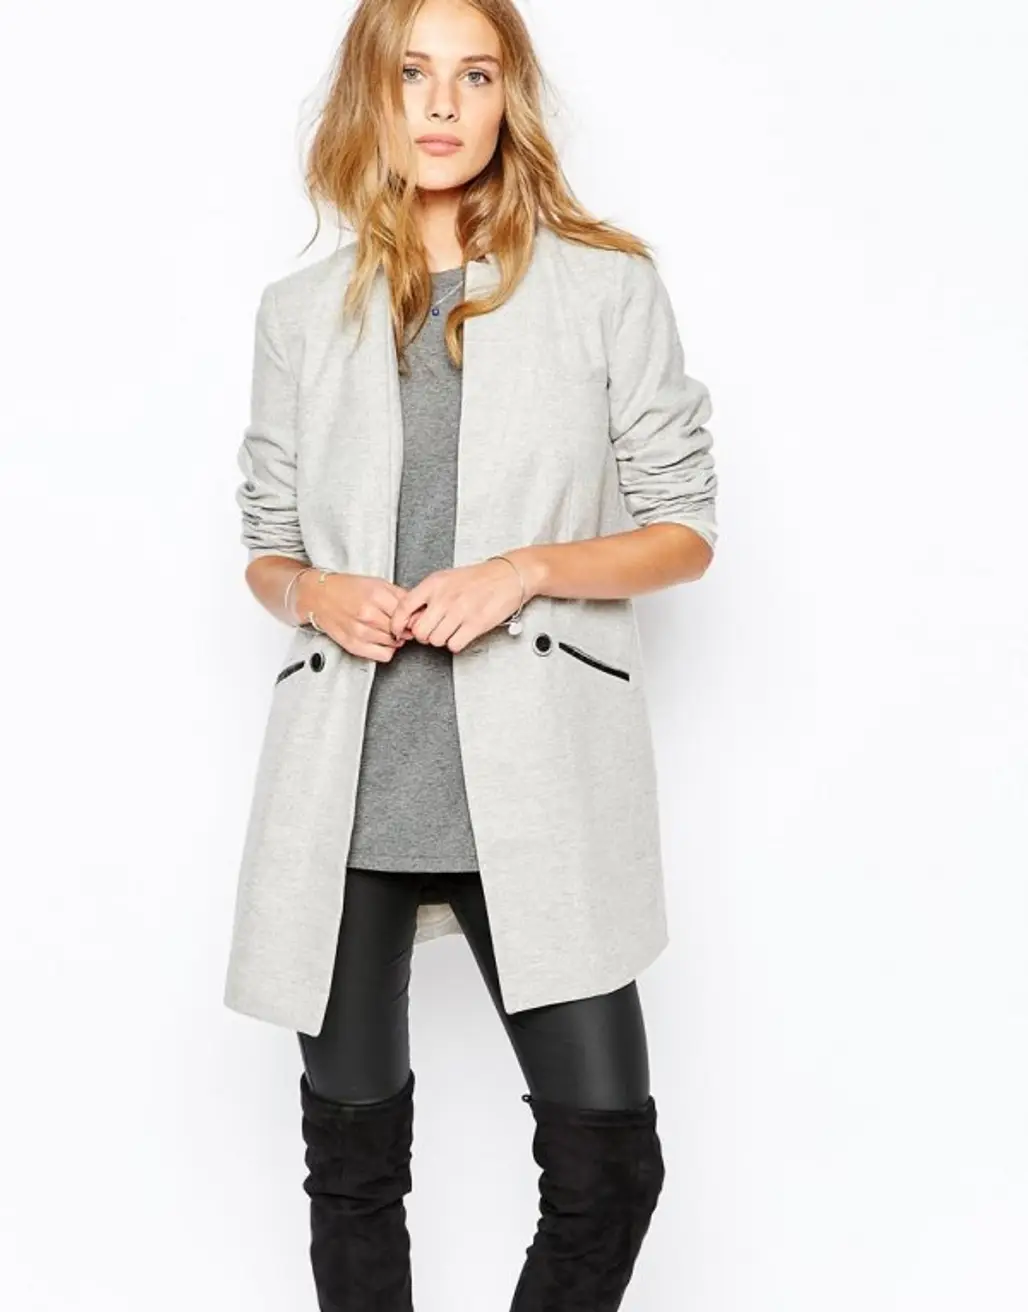 Chic Coats for Fall That Cost Less than 100 ...